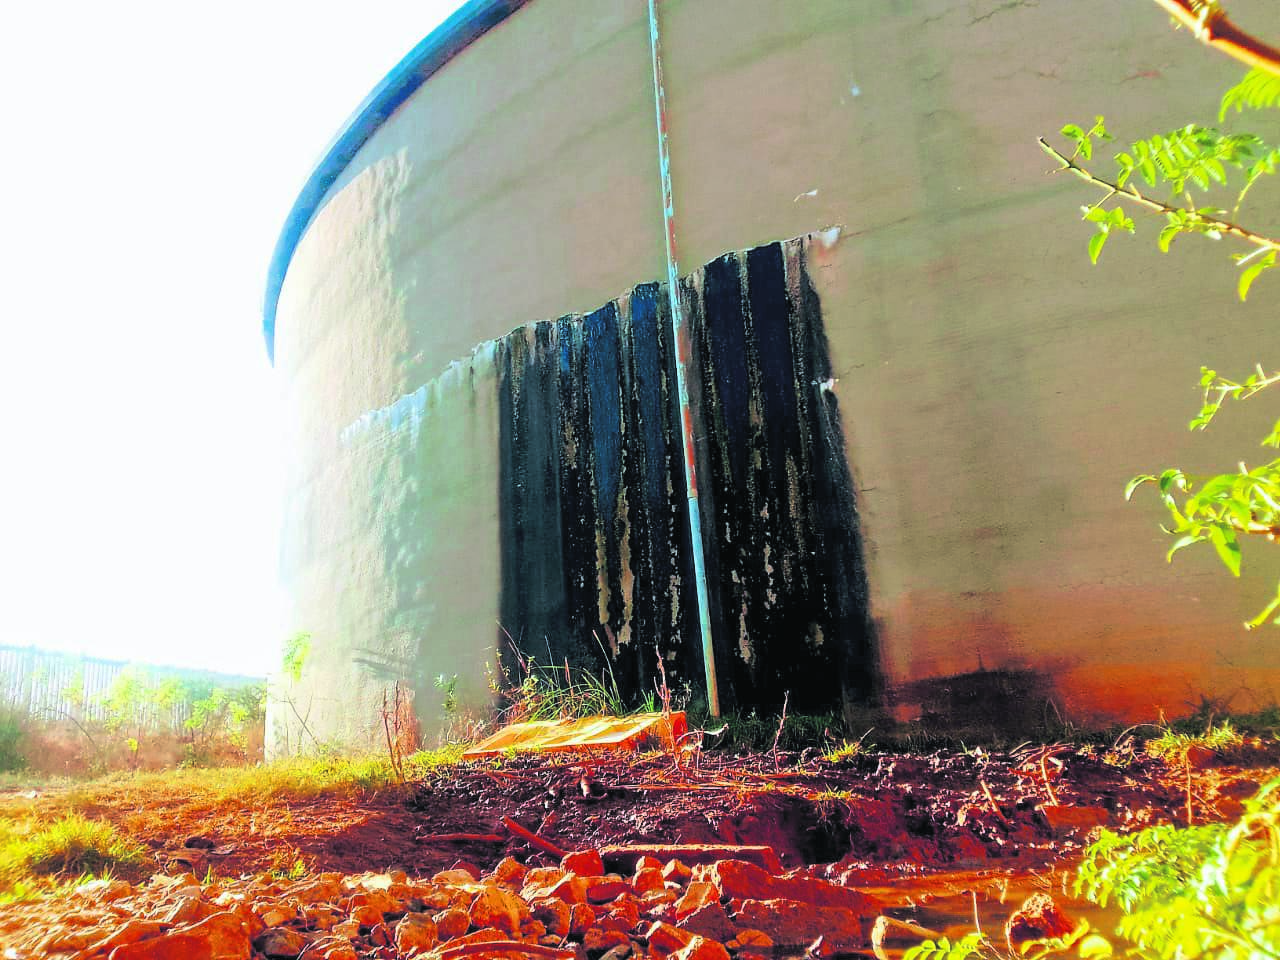 Residents want this reservoir repaired. ­          Photo by Raymond Morare